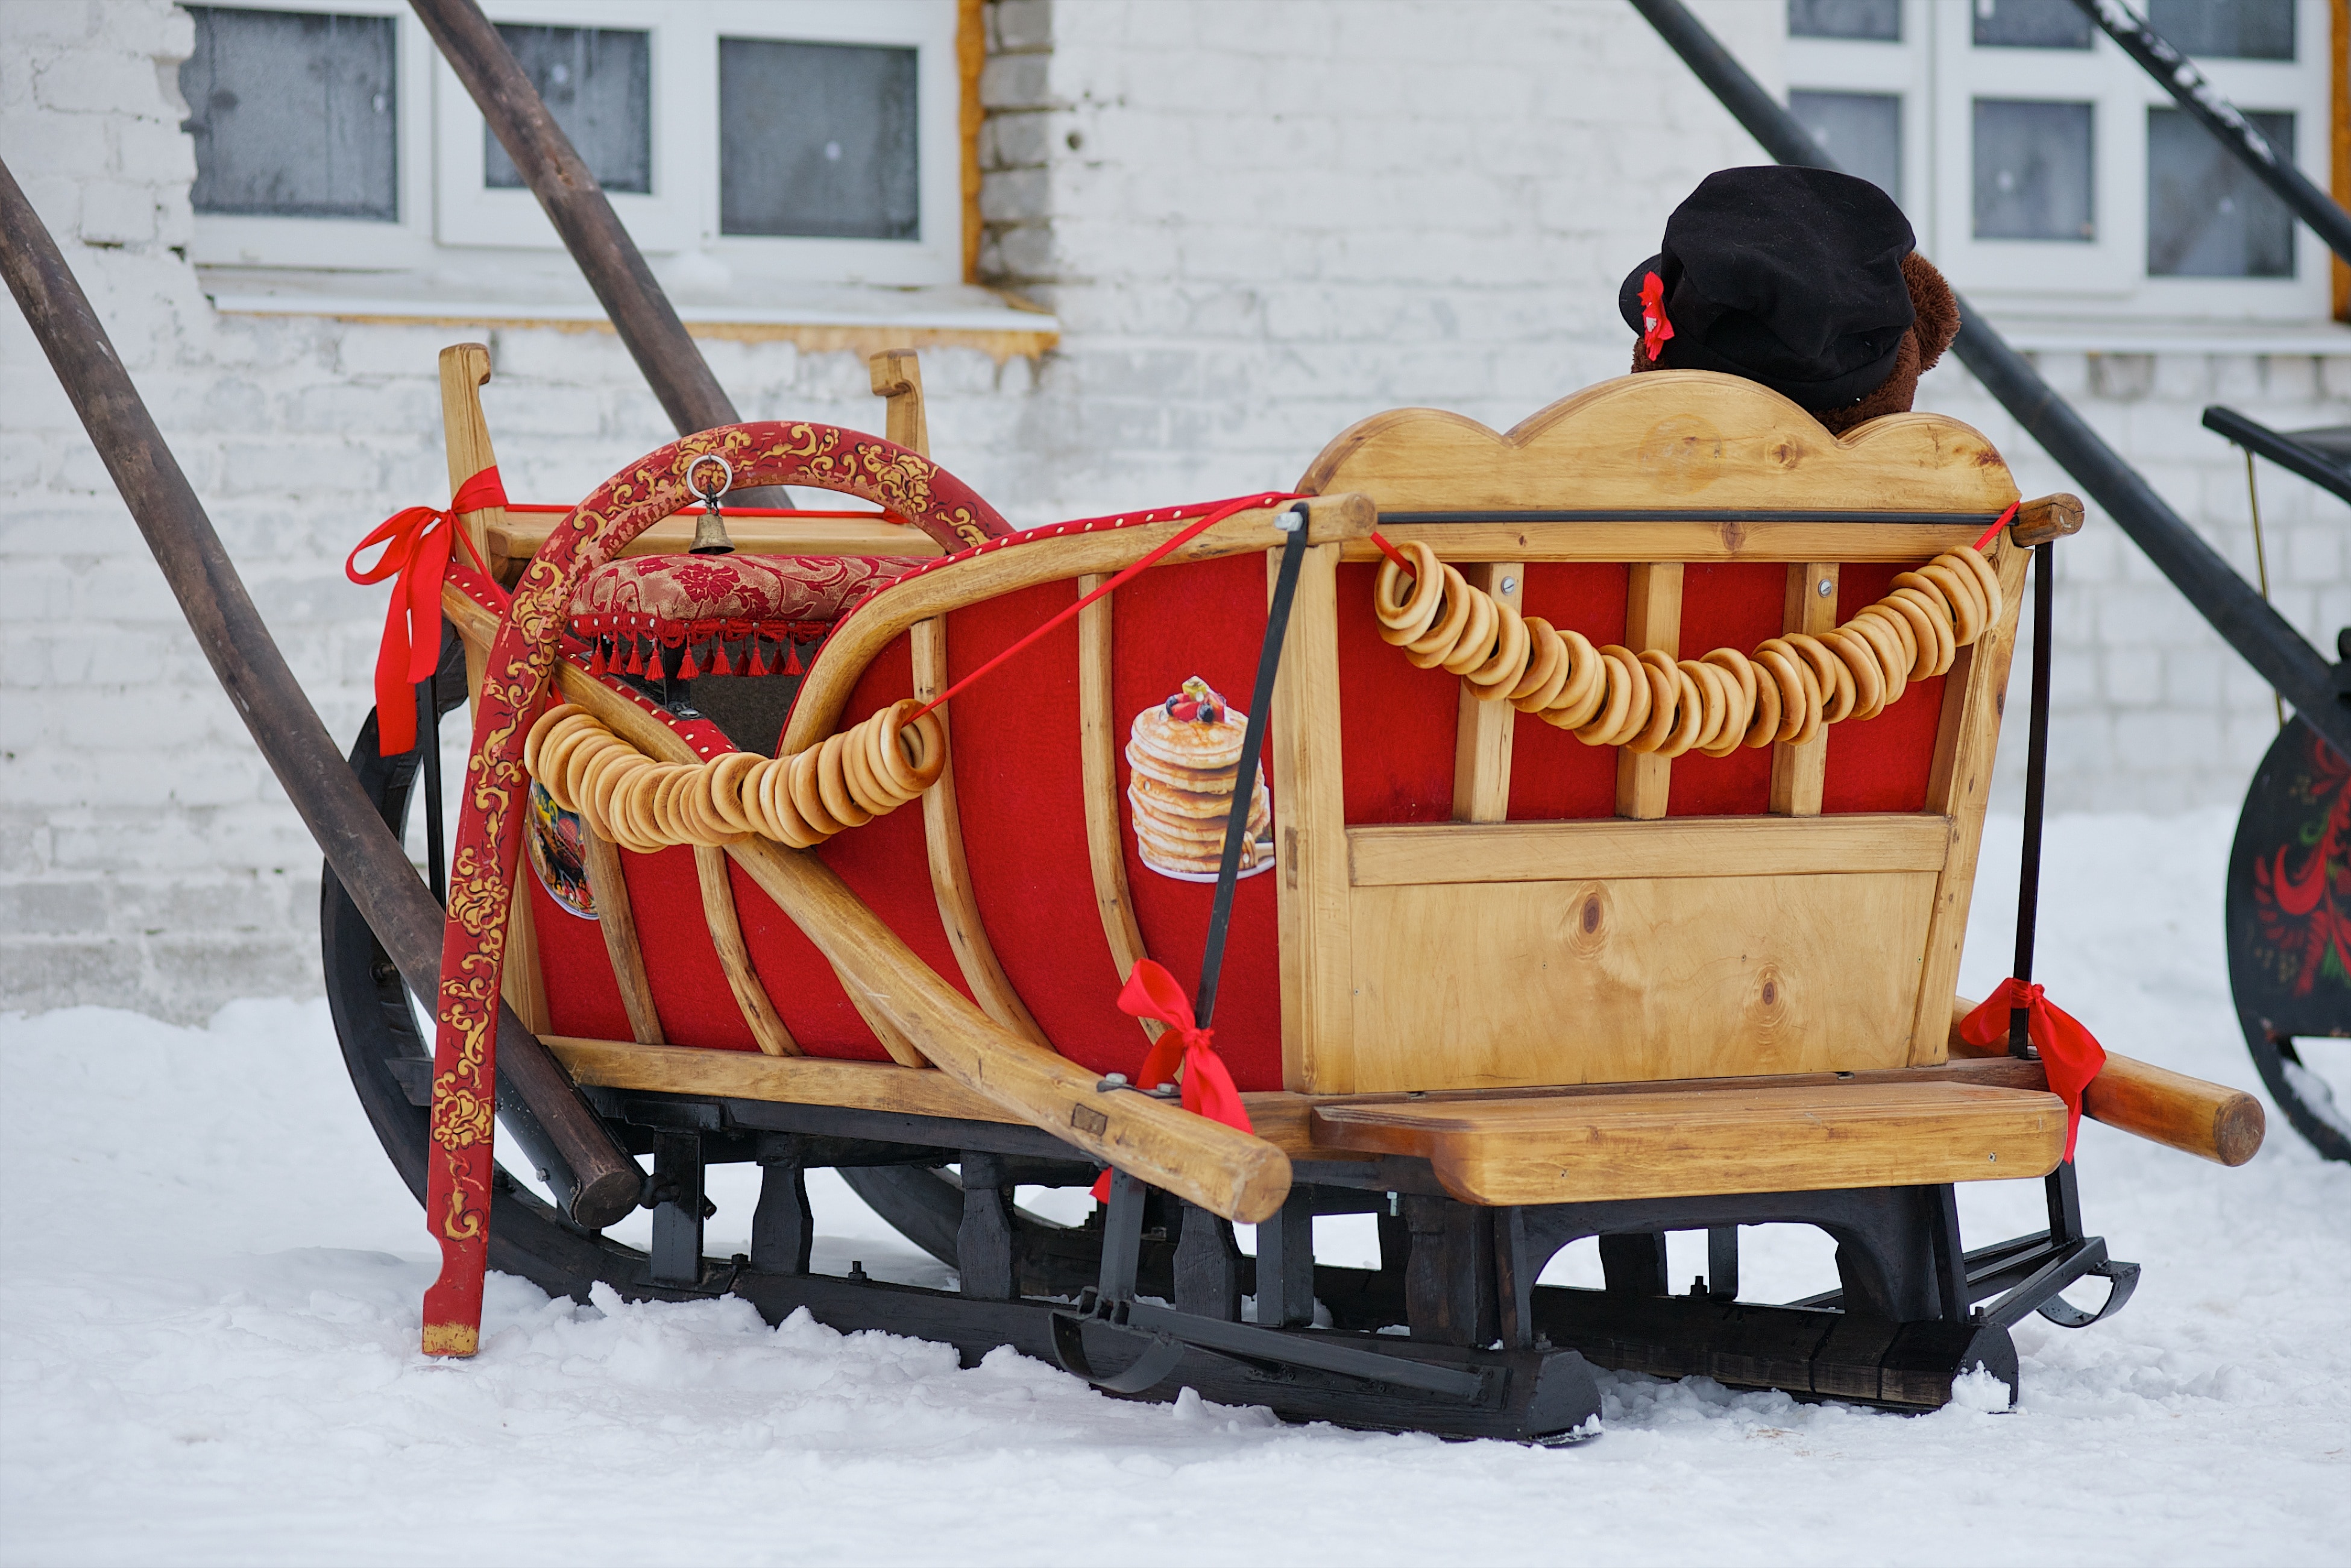 Sled, Russia, Cristmas, Winter, Rest, winter, snow